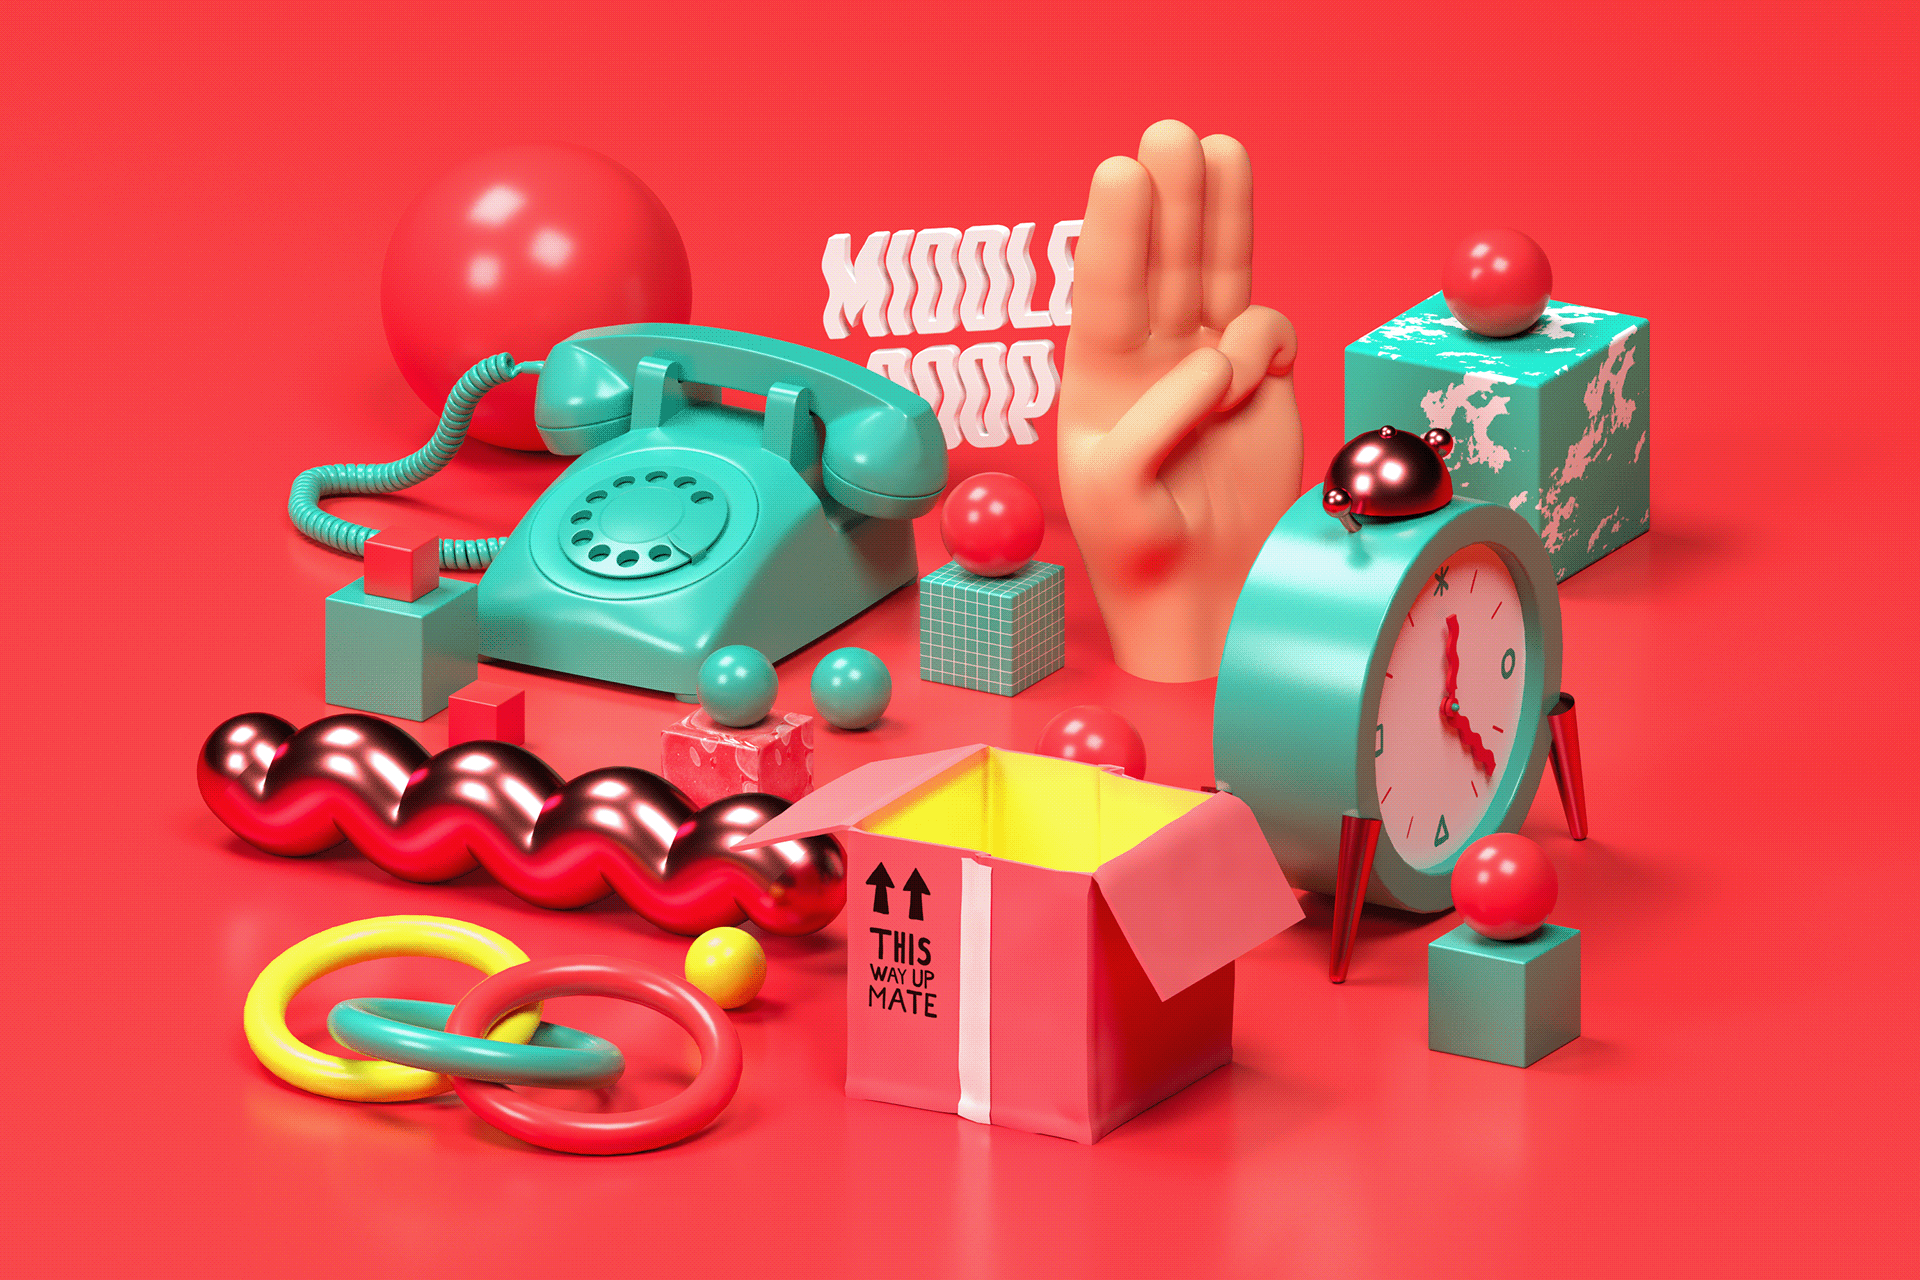 3d rendered toys, clocks and geometric shapes